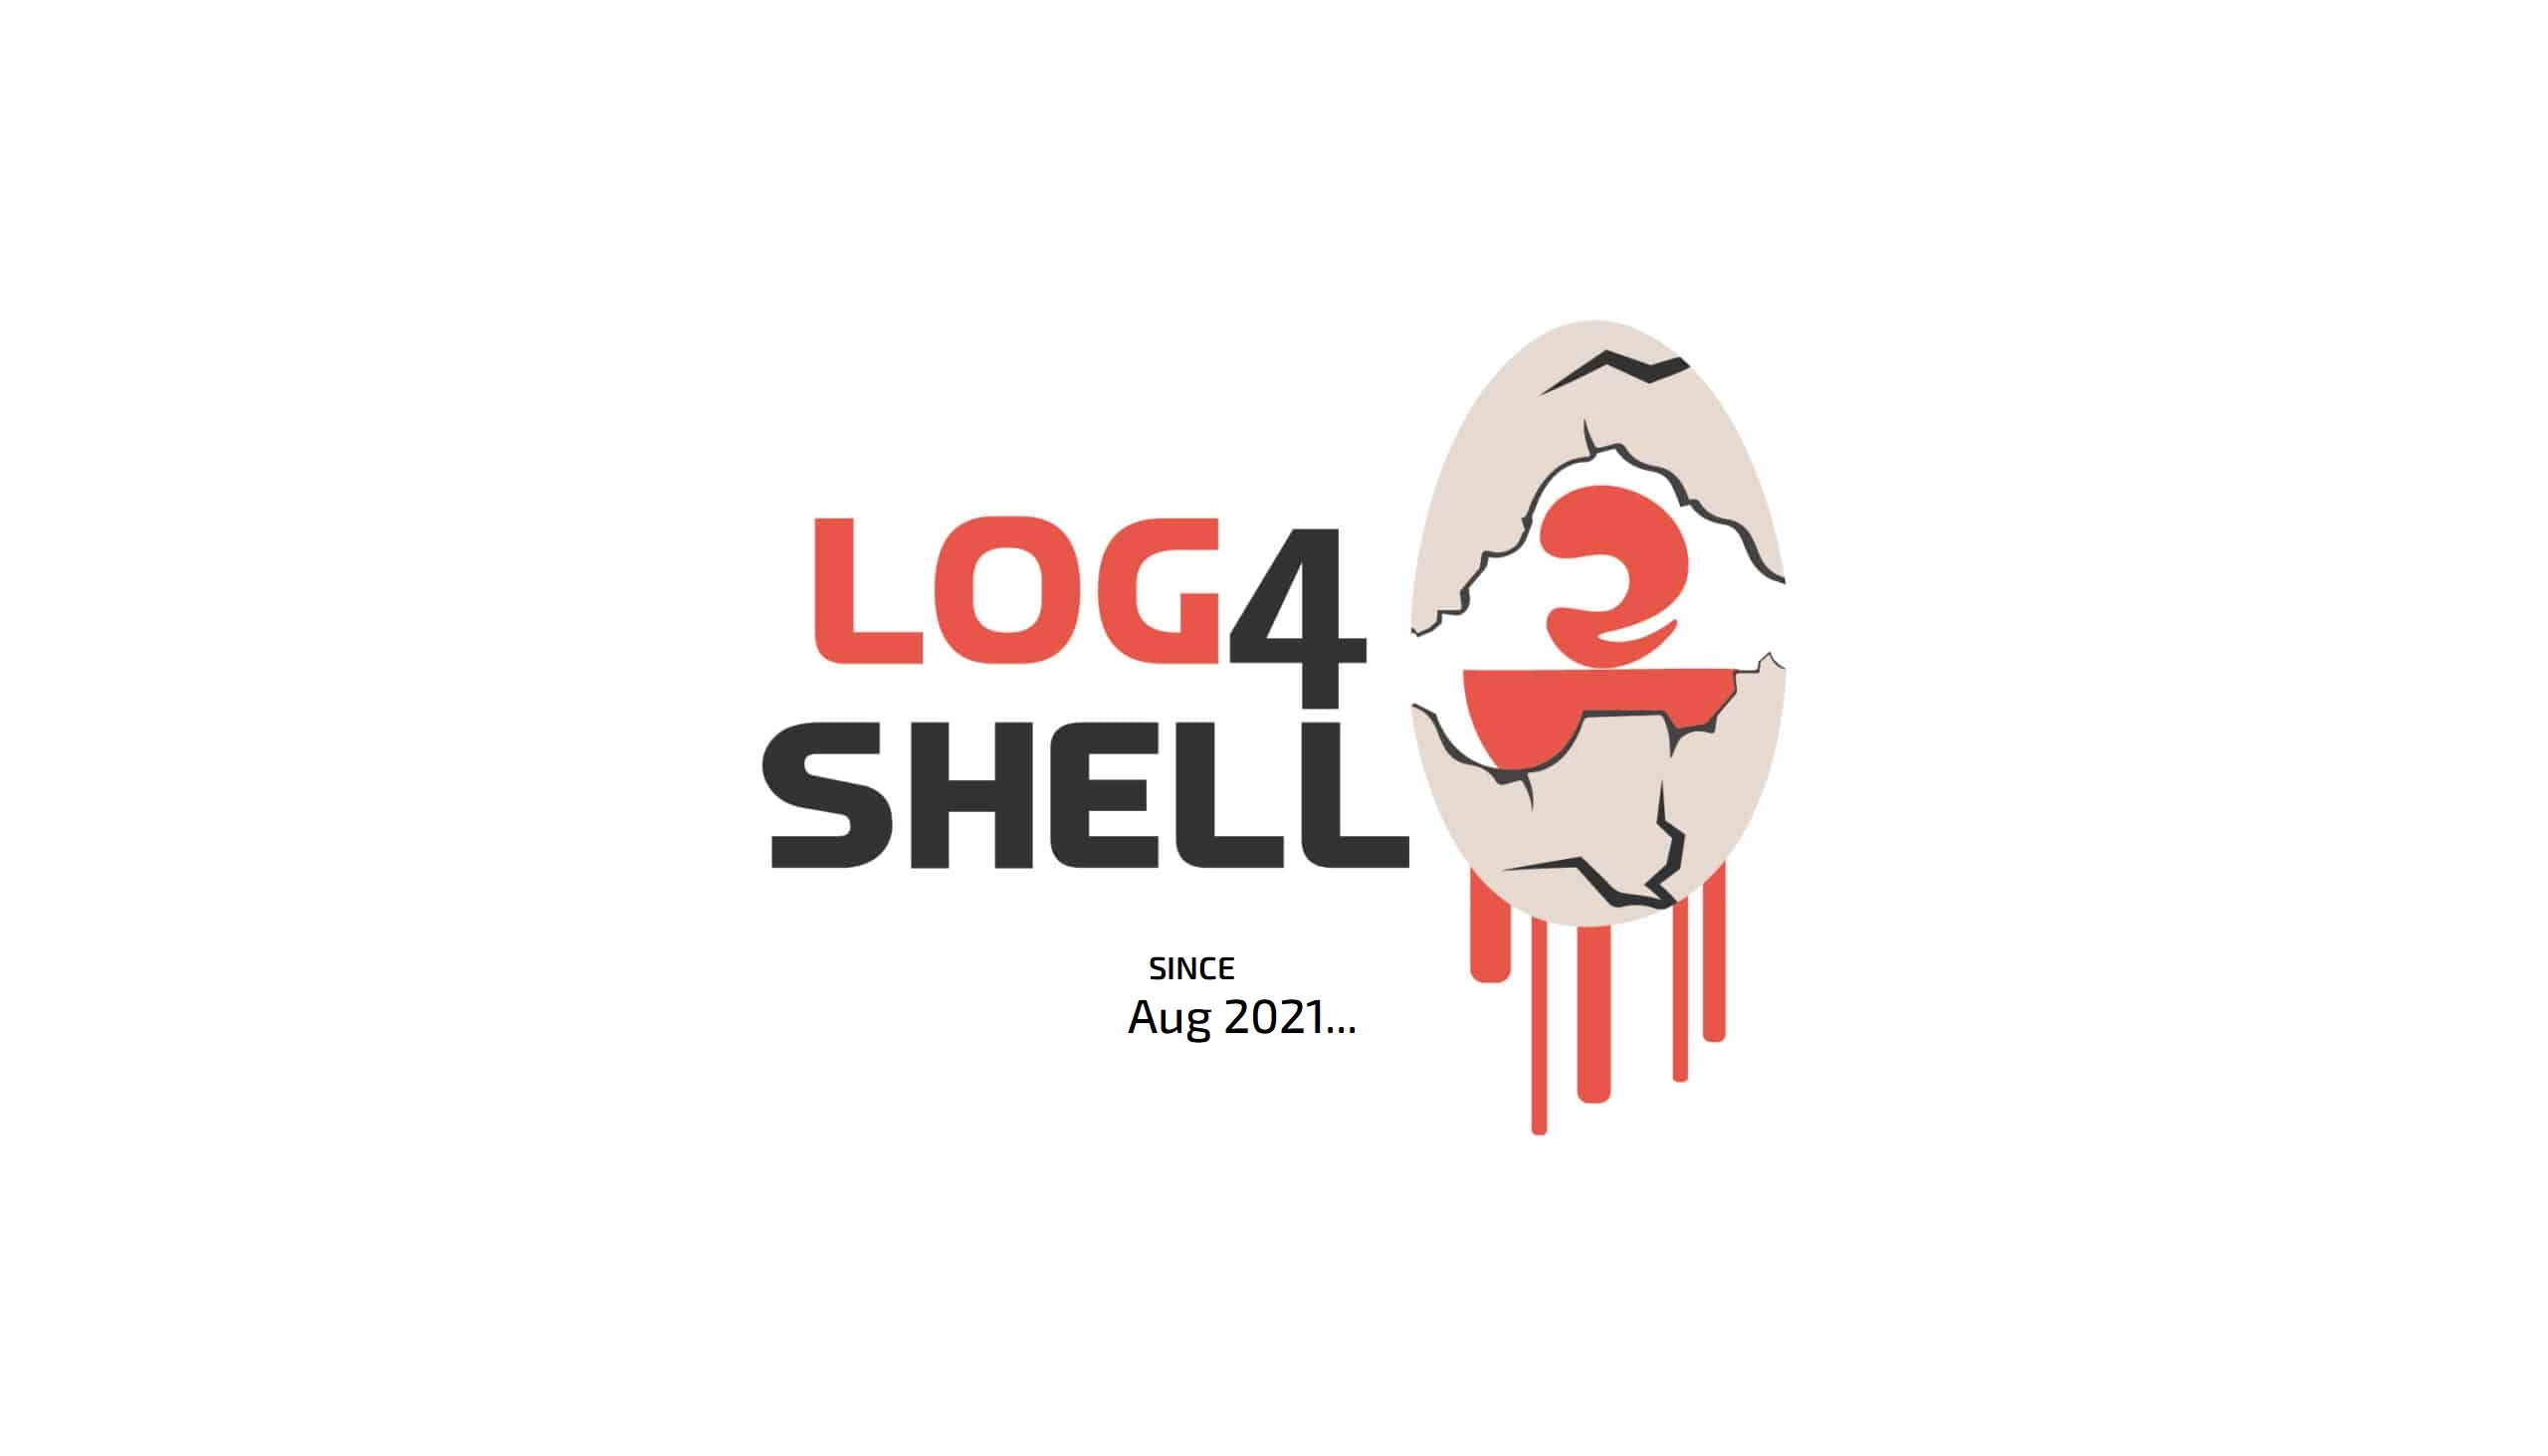 The Log4Shell vulnerability may have been exploited since August 2021